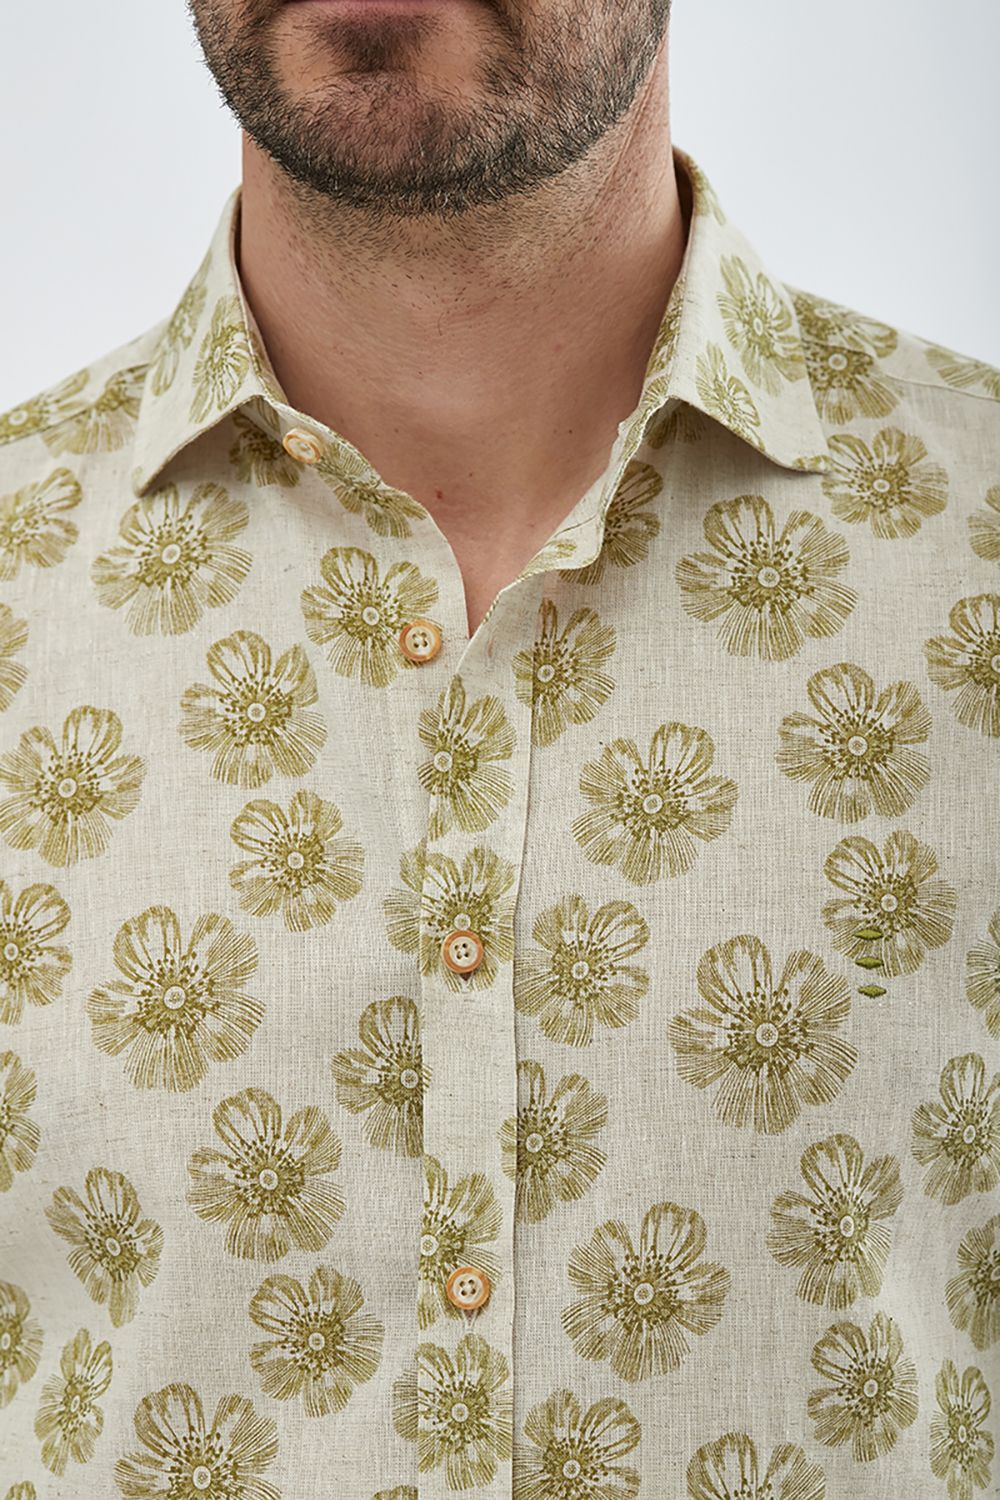 FLORENTINO - Linen Blend Shirt with Olive Print | Buster McGee